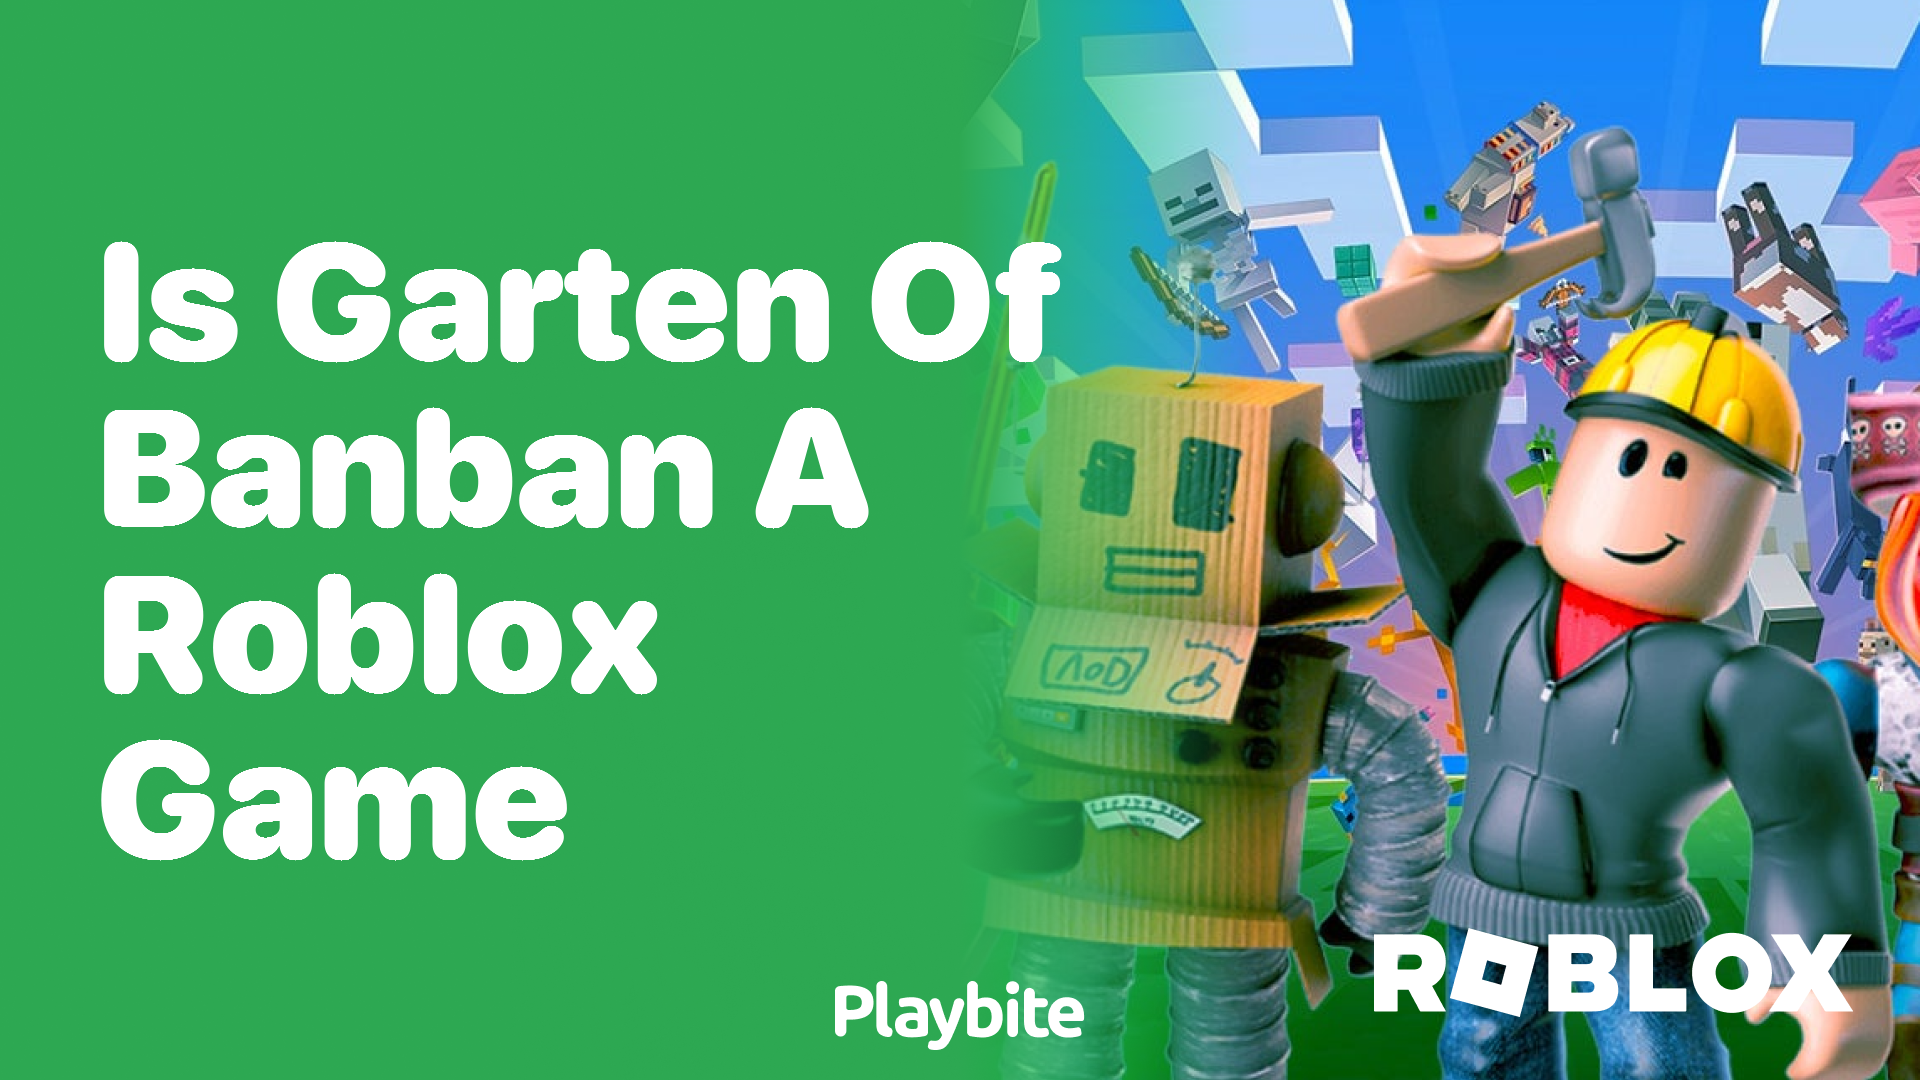 Is Garten of Banban a Roblox Game? Let&#8217;s Find Out!